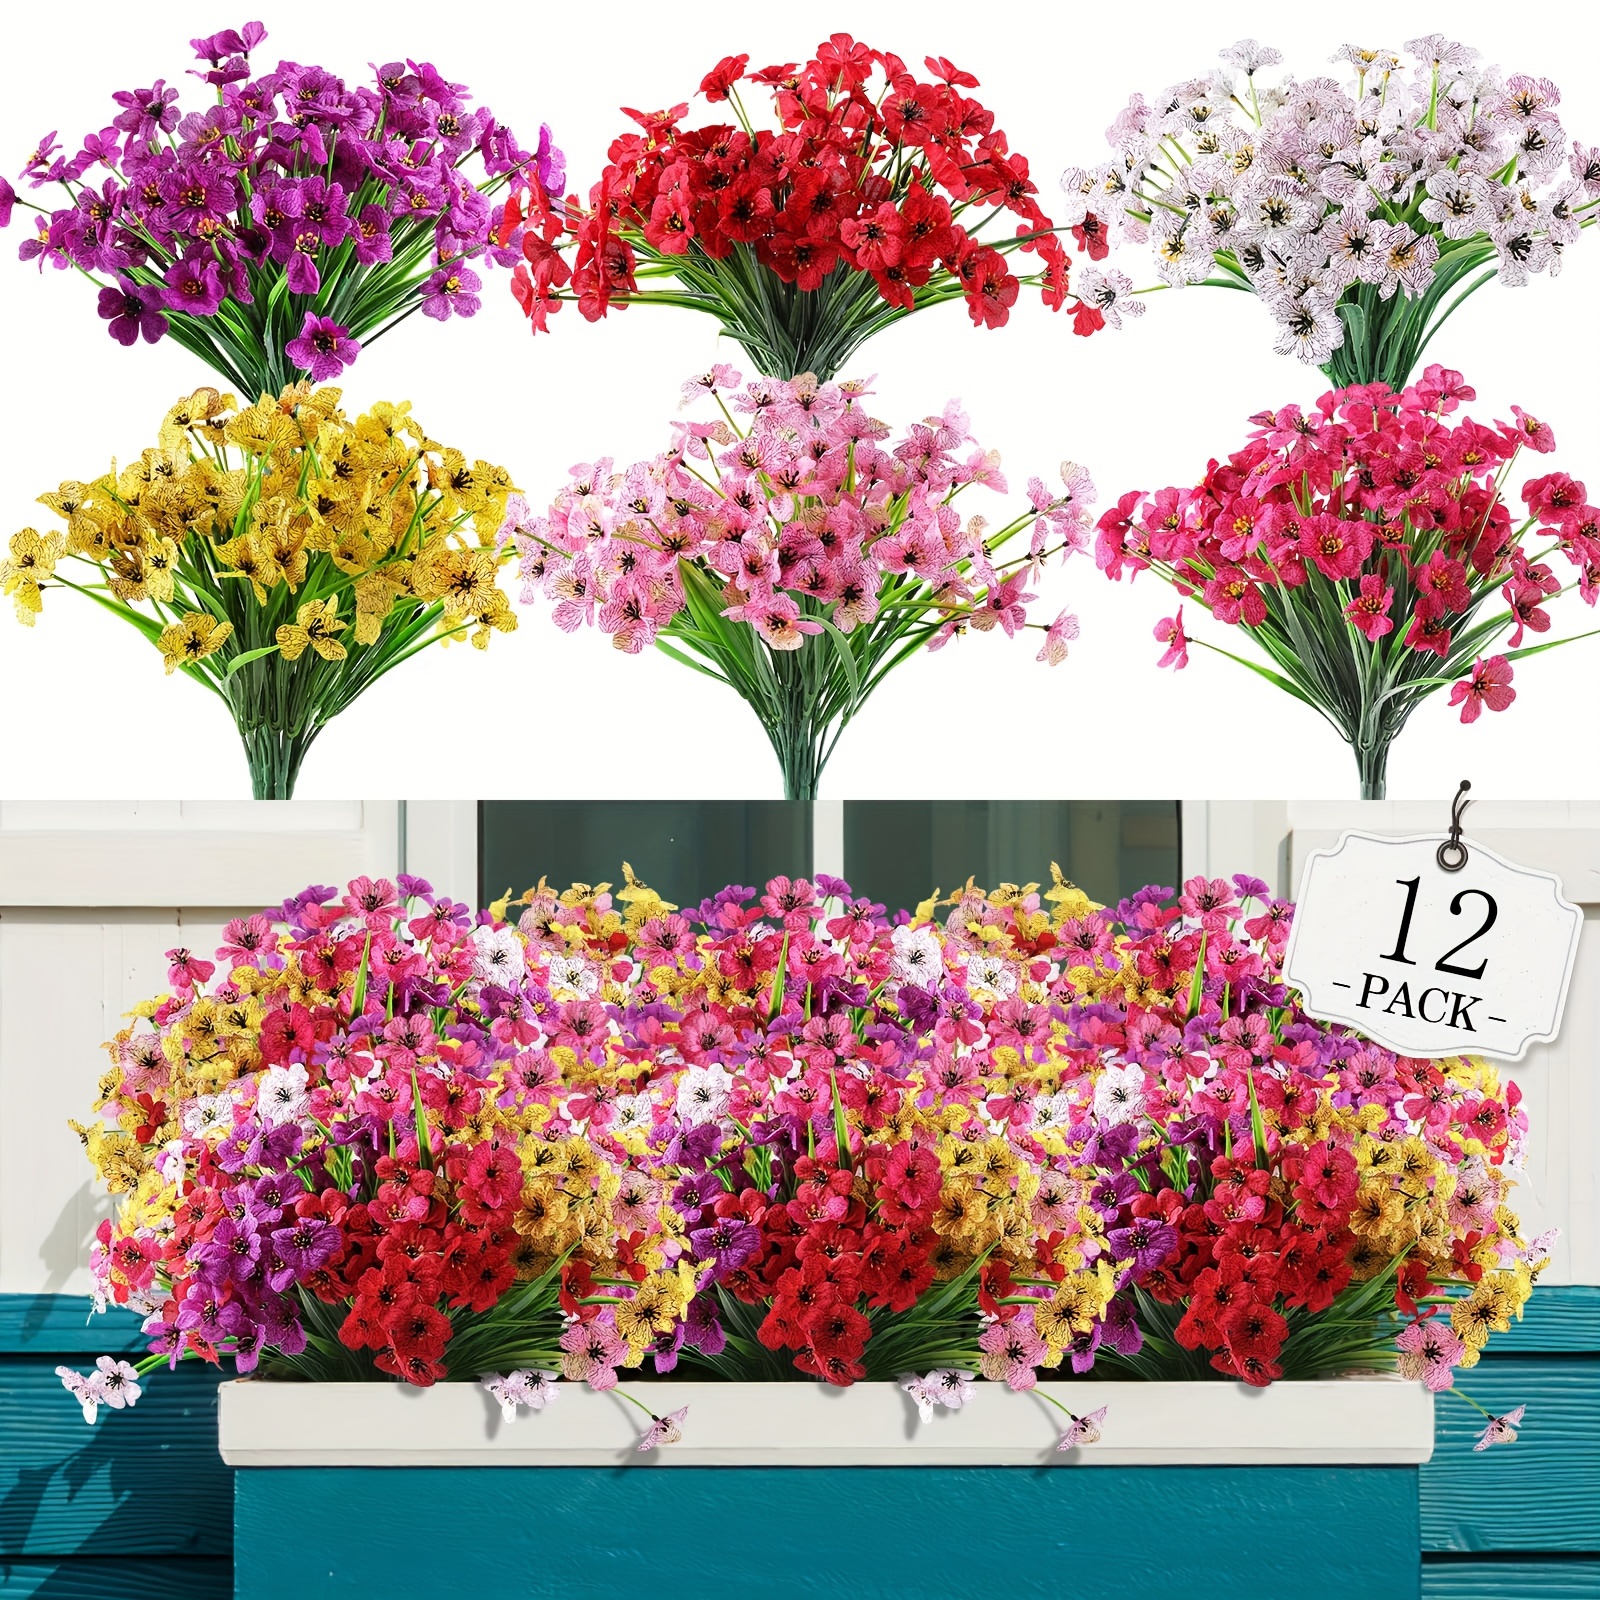 

12 Bundles, Artificial Flowers For Outdoor, No Fade Fake Plastic Flowers Faux Plants For Decoration Hanging Planters Indoor Outside Garden Porch Window Box Home Wedding Farmhouse